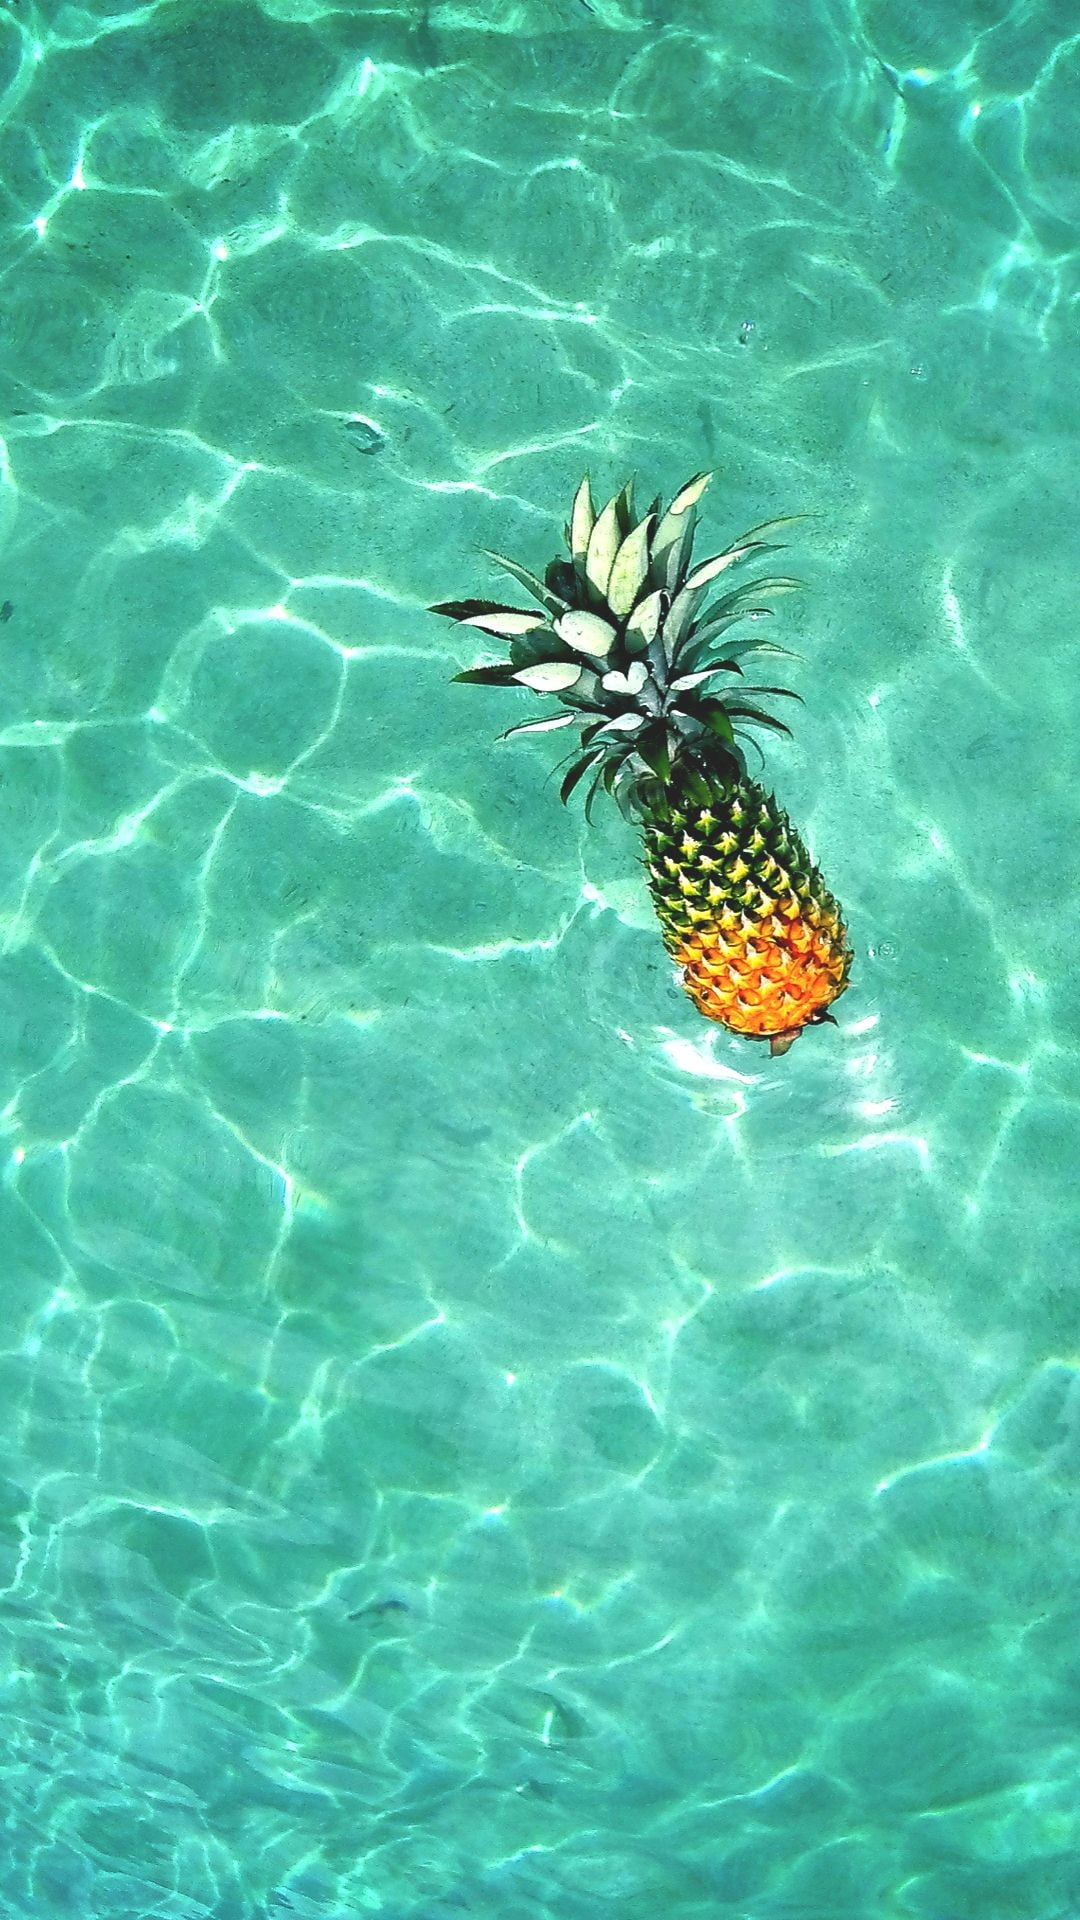 Pineapples floating in the pool | iPhone Wallpapers